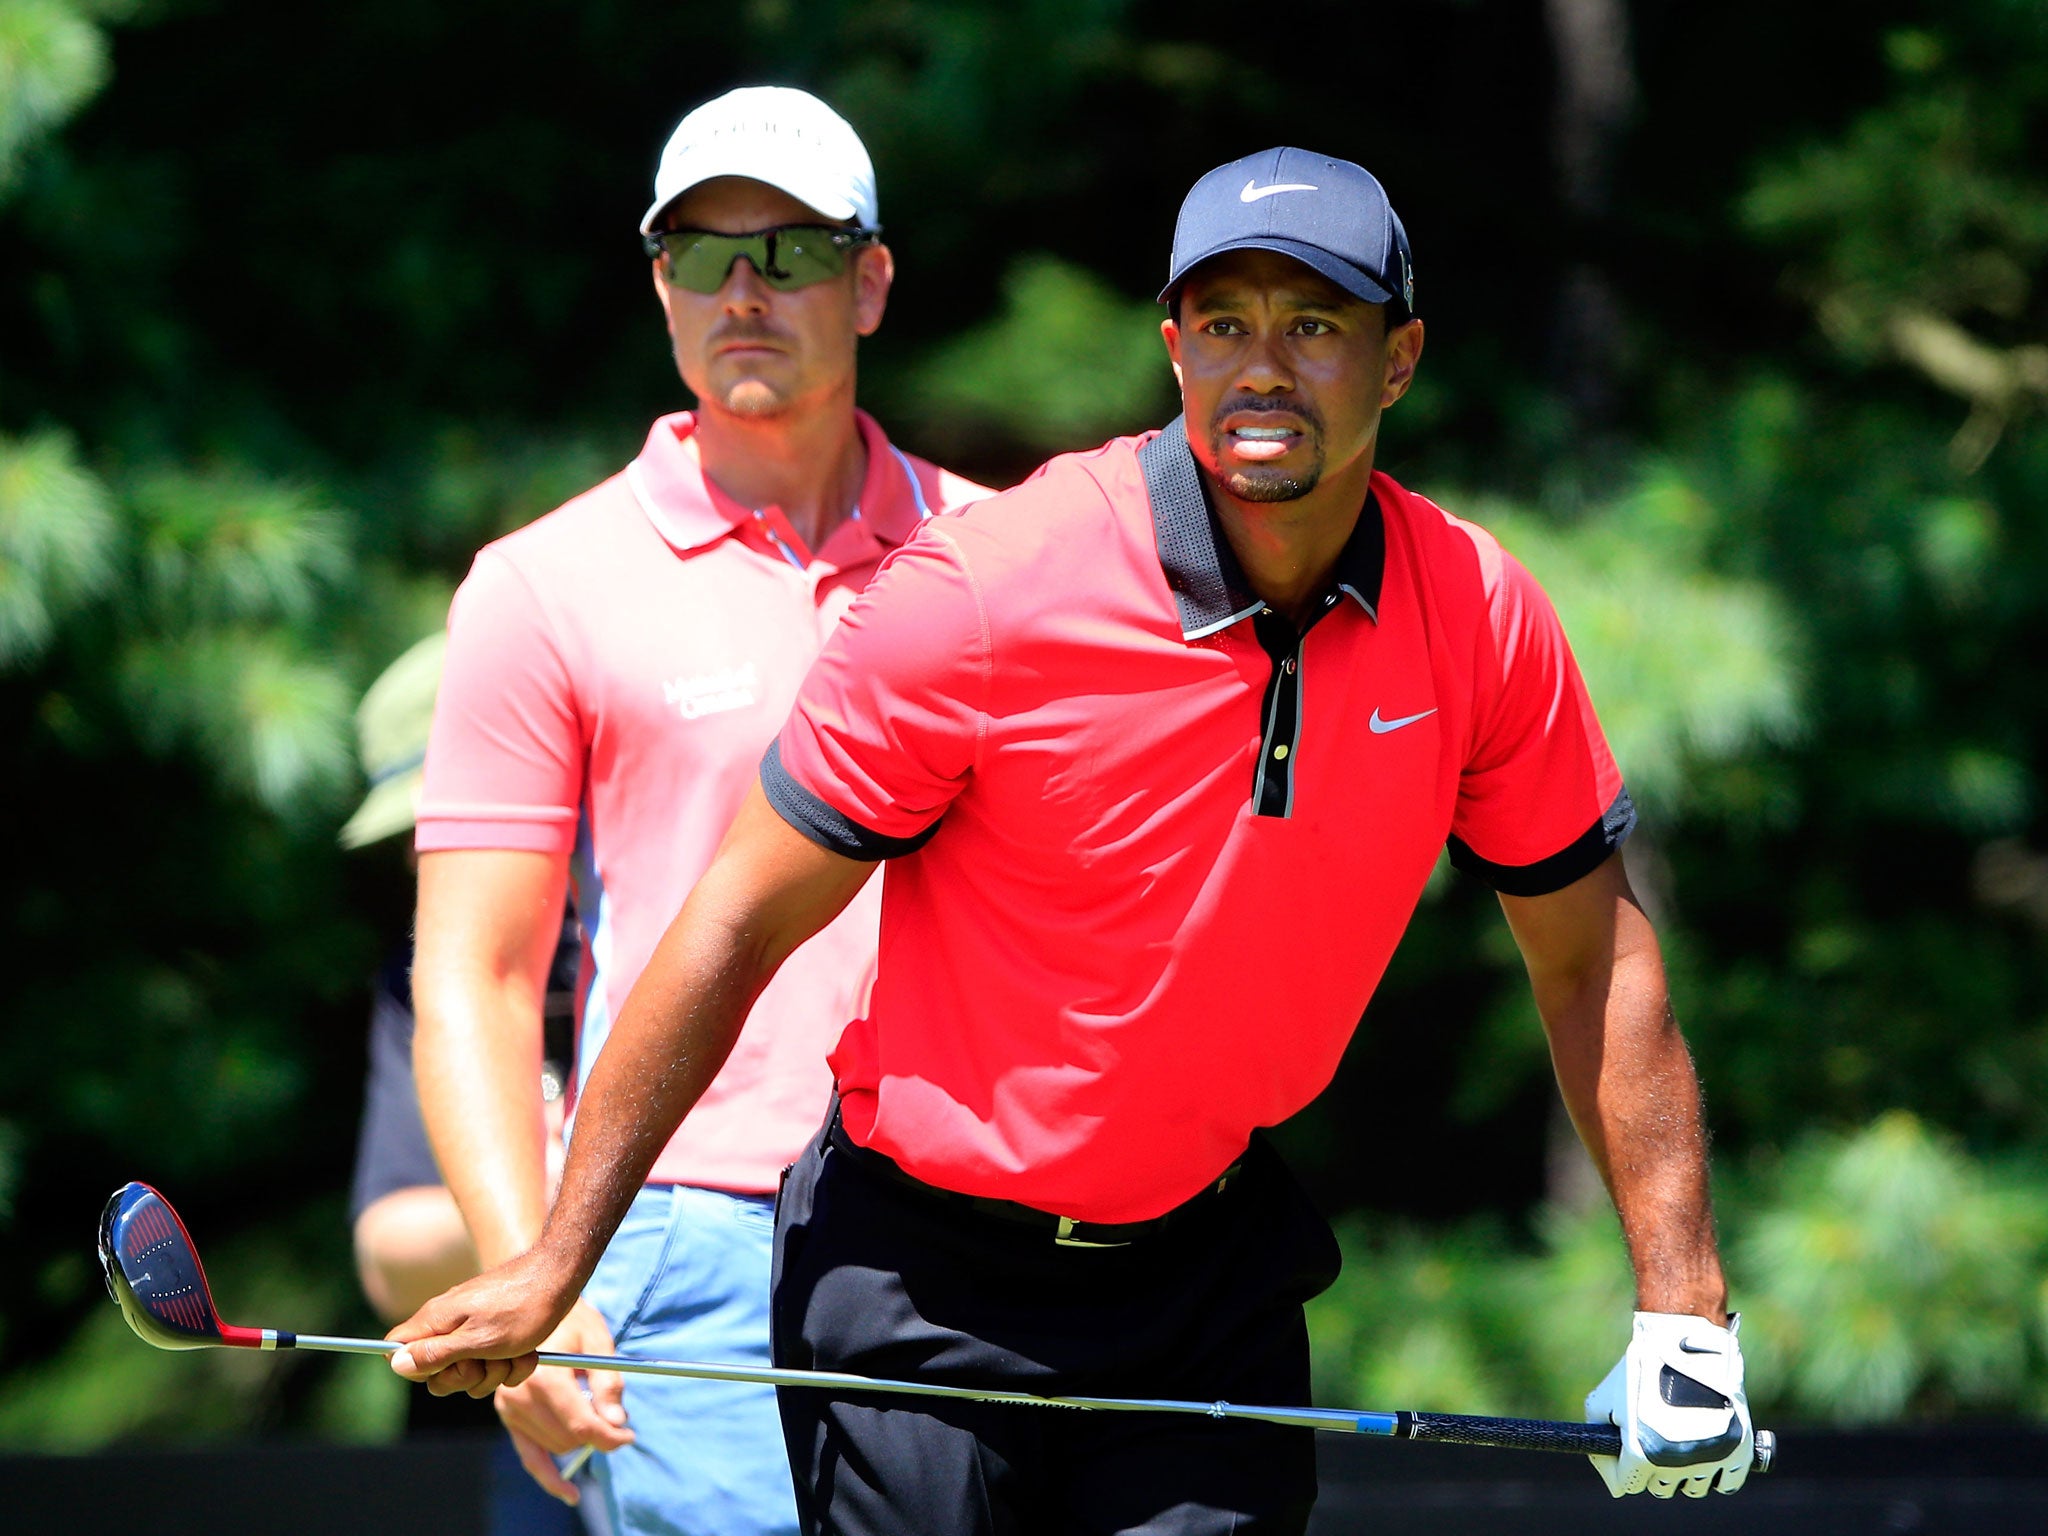 Tiger Woods had a steady start to his final round in Ohio